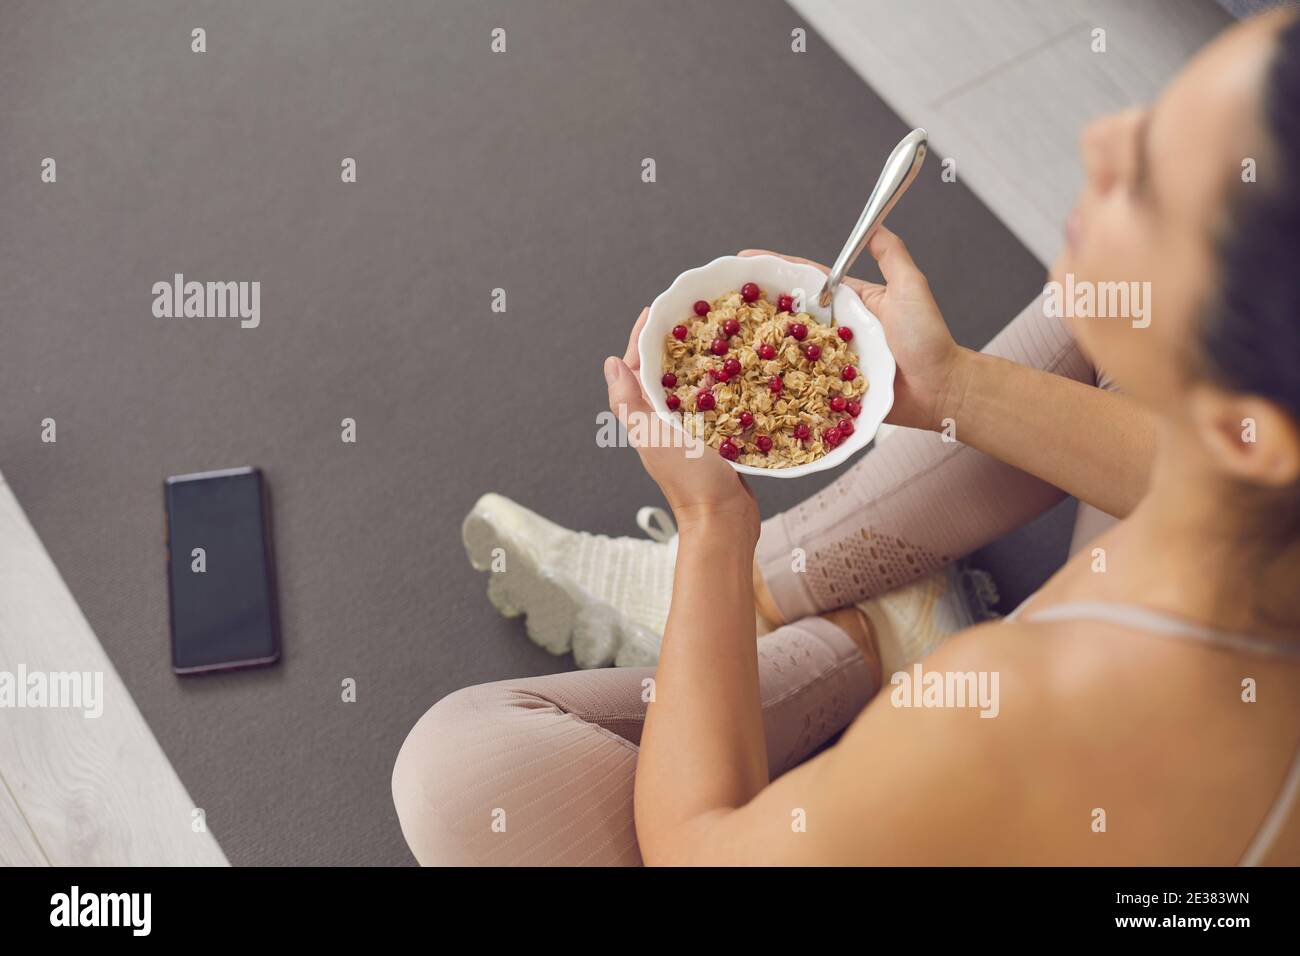 Bowl of oatmeal with cranberries in the hands of an unknown sports woman sitting on a gray yoga mat. Stock Photo